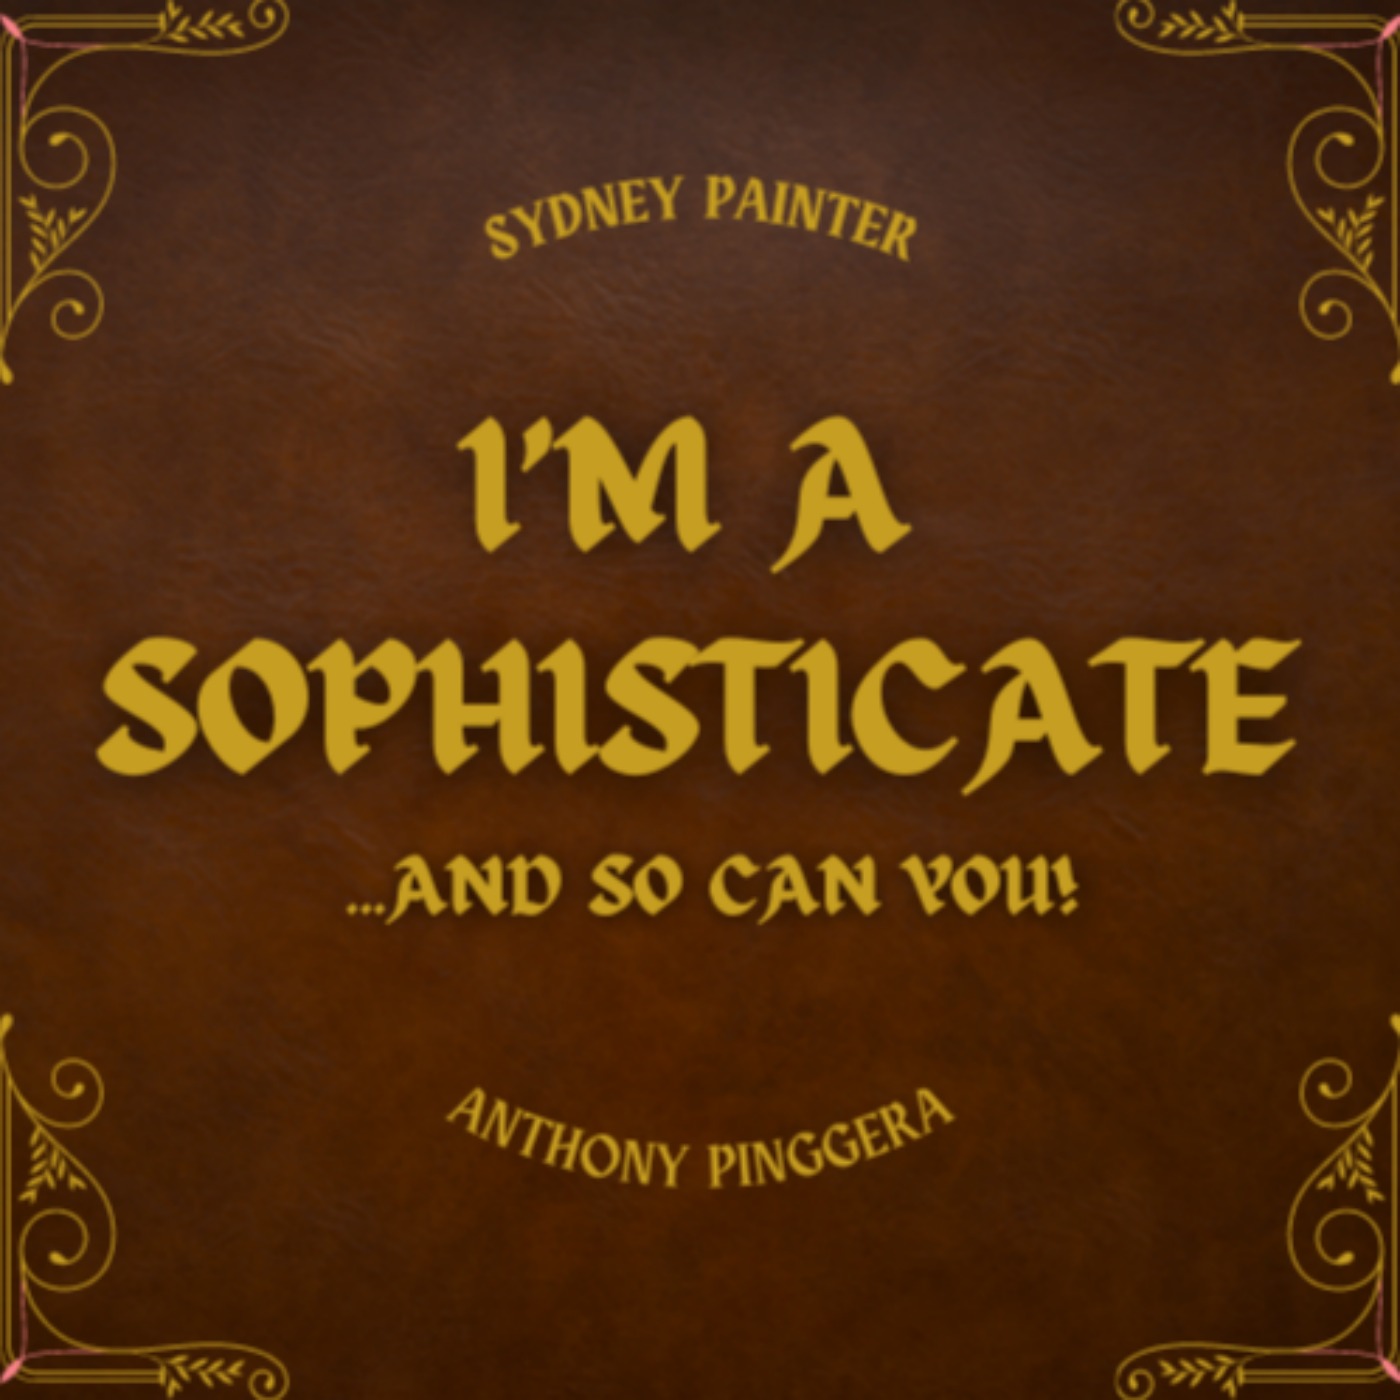 I'm A Sophisticate and So Can You! Album Art